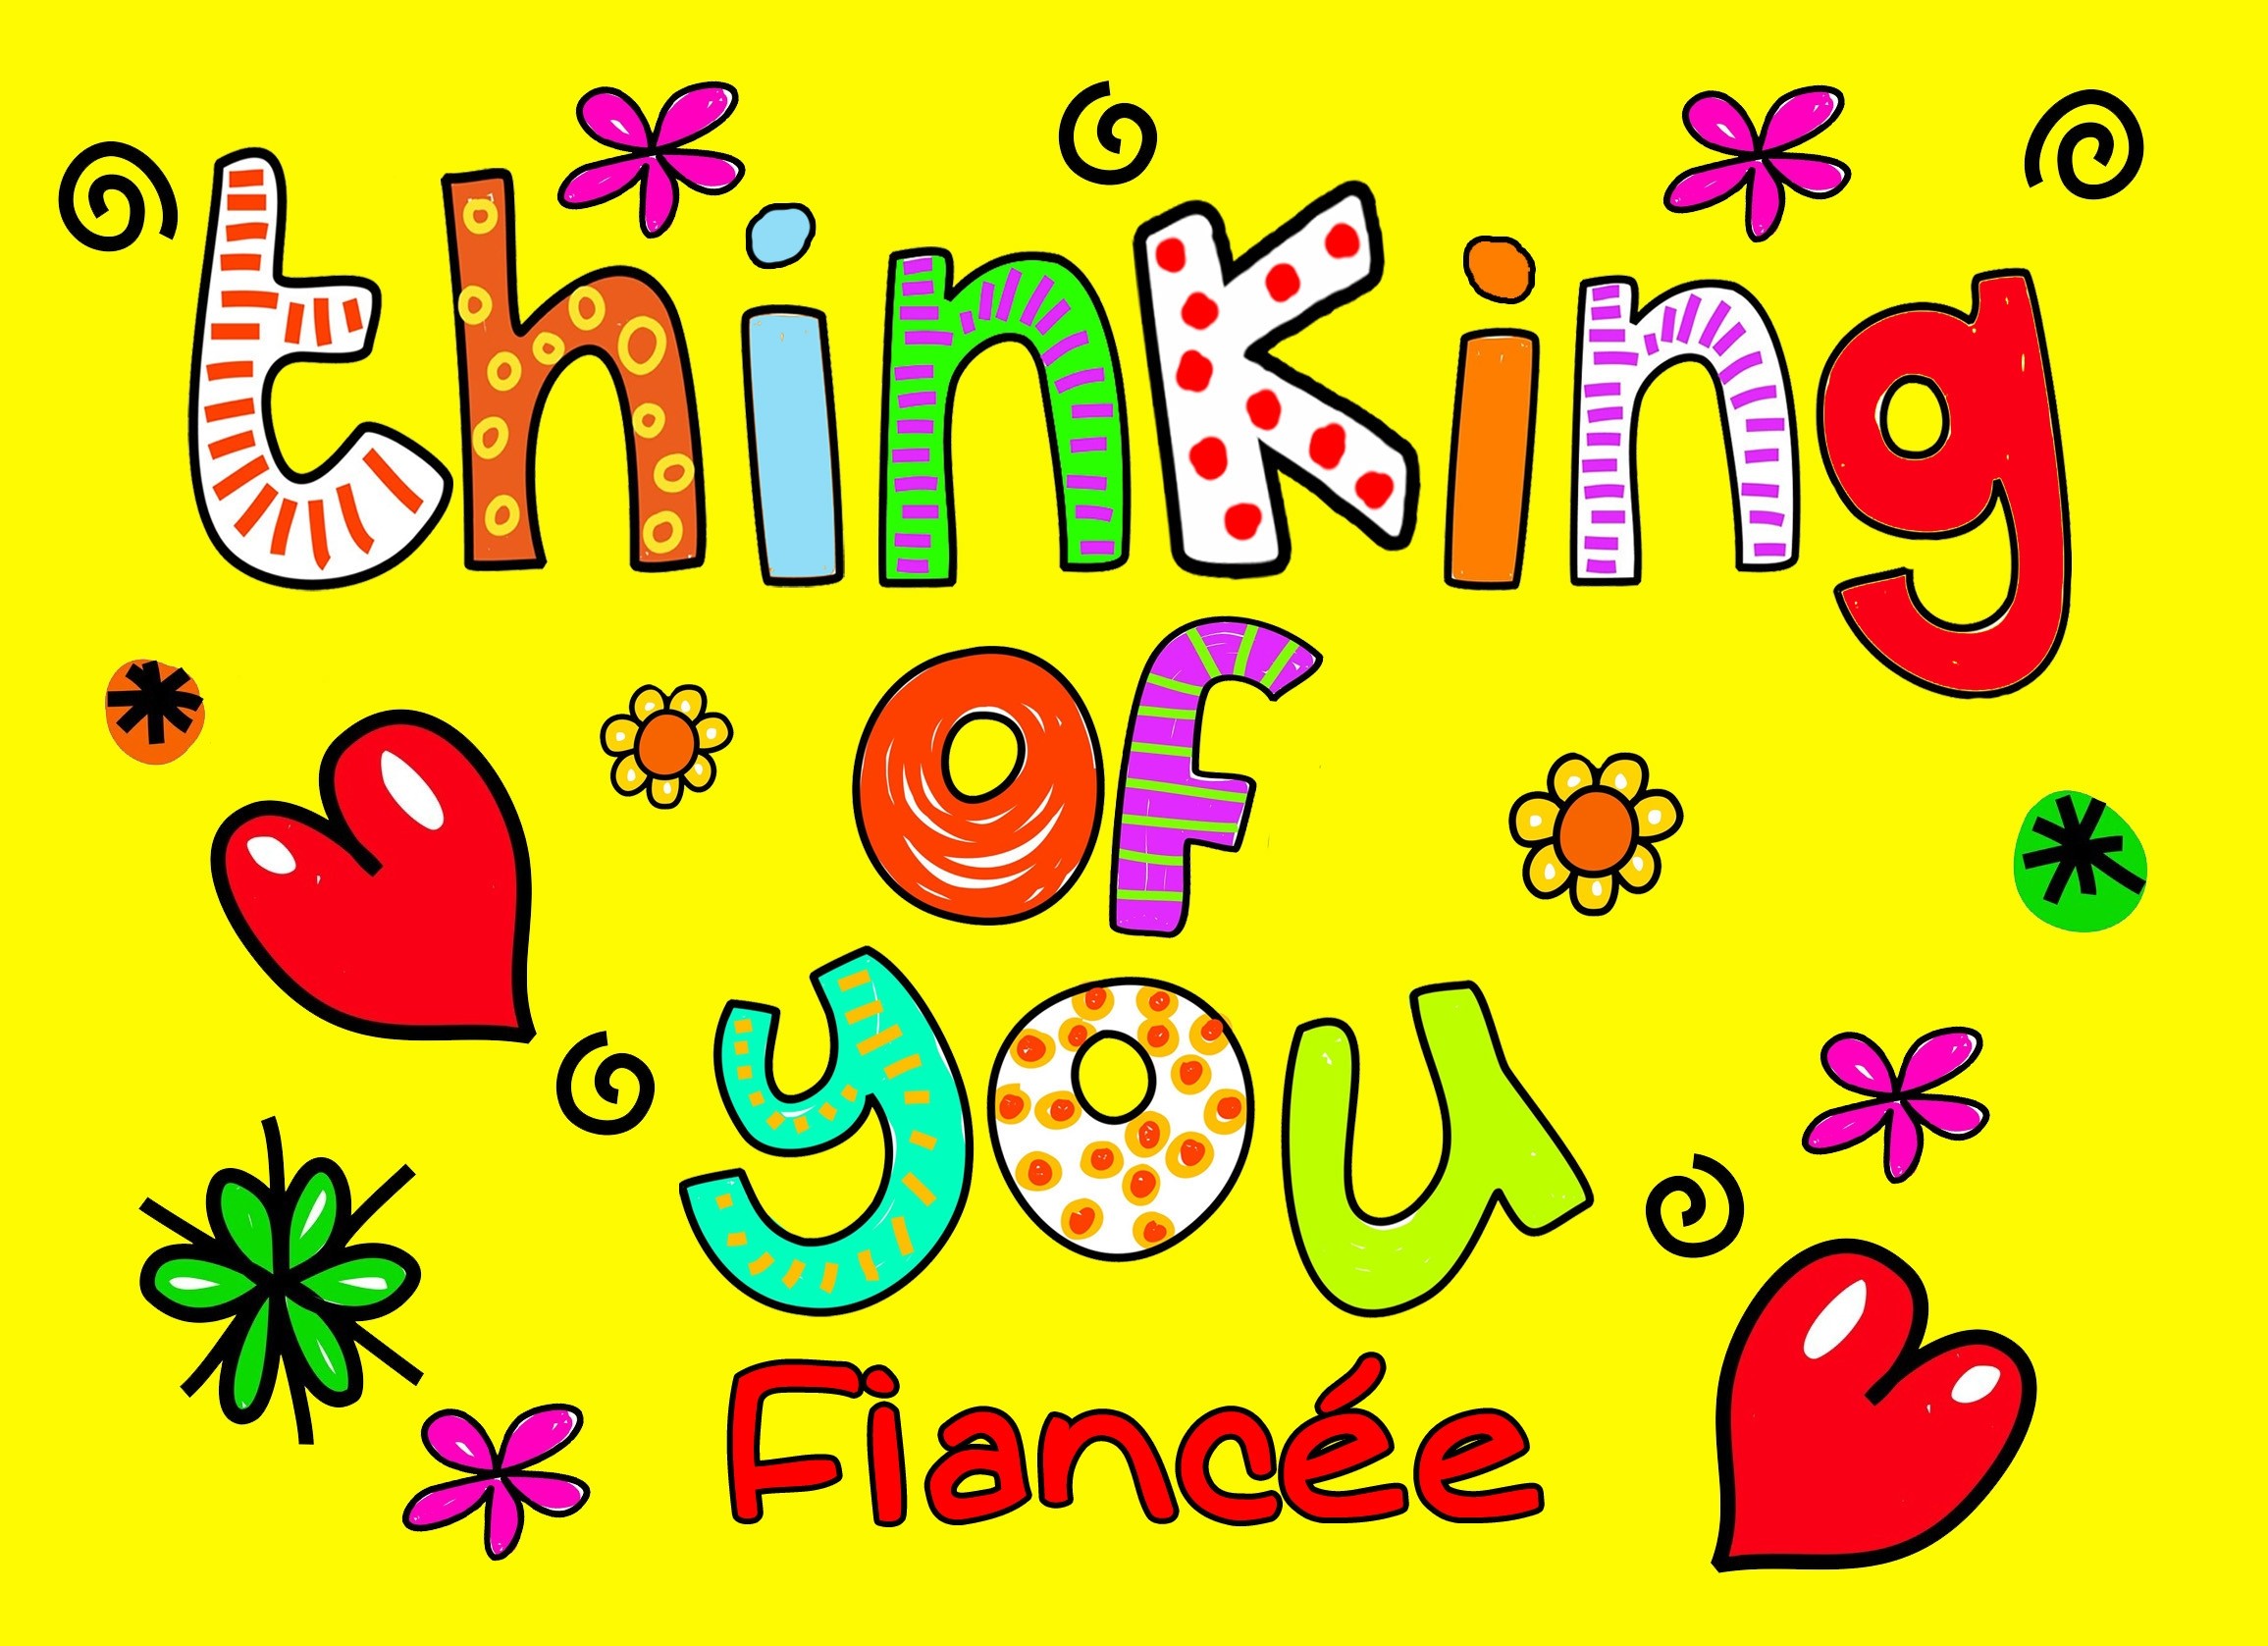 Thinking of You 'Fiancee' Greeting Card